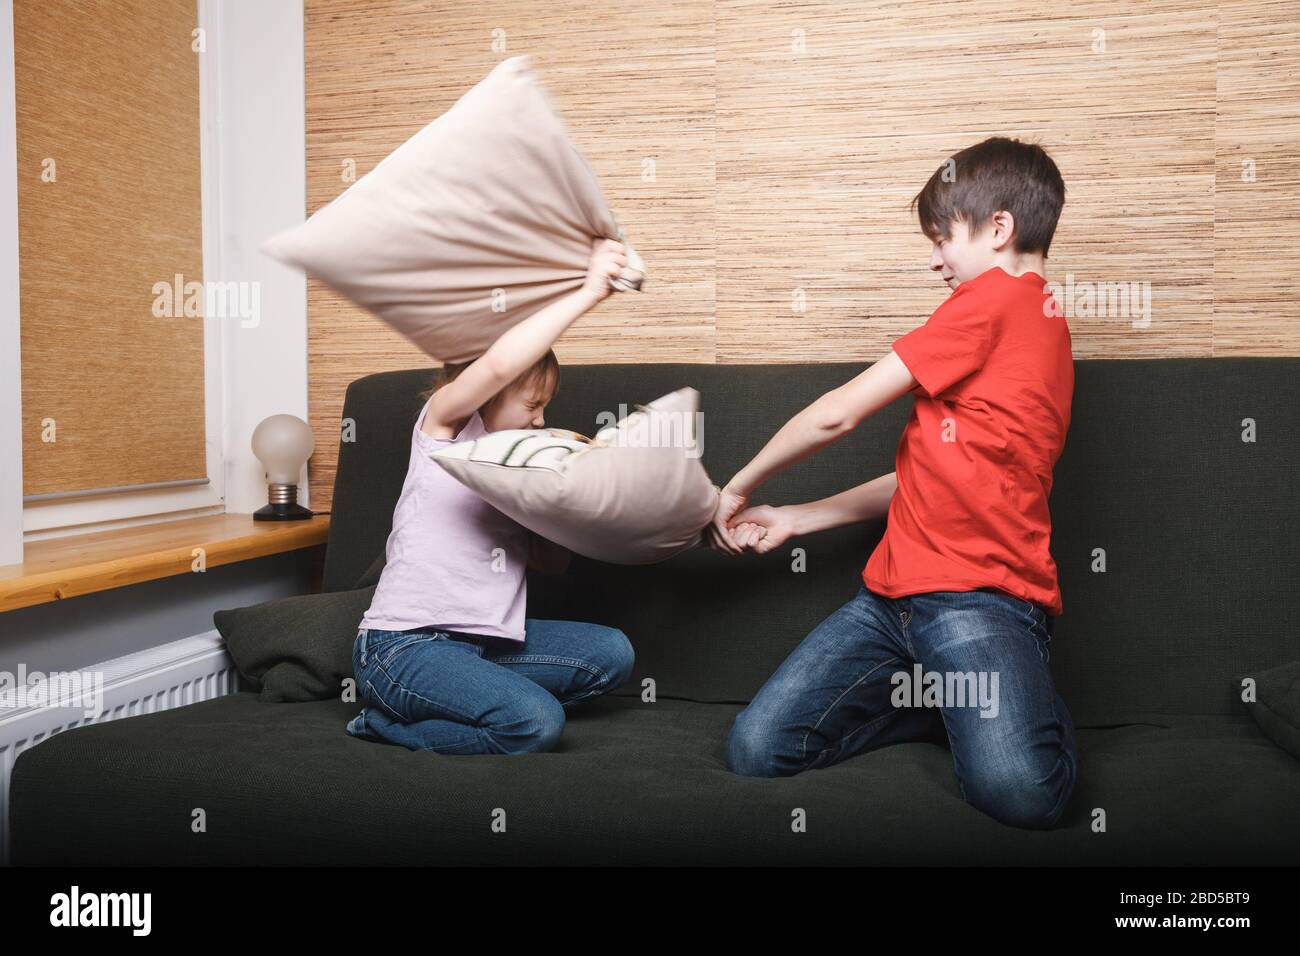 Siblings fighting with pillows stuck at home being in self-isolation. Quarantine and lockdown protective measures against spreading of coronavirus pan Stock Photo